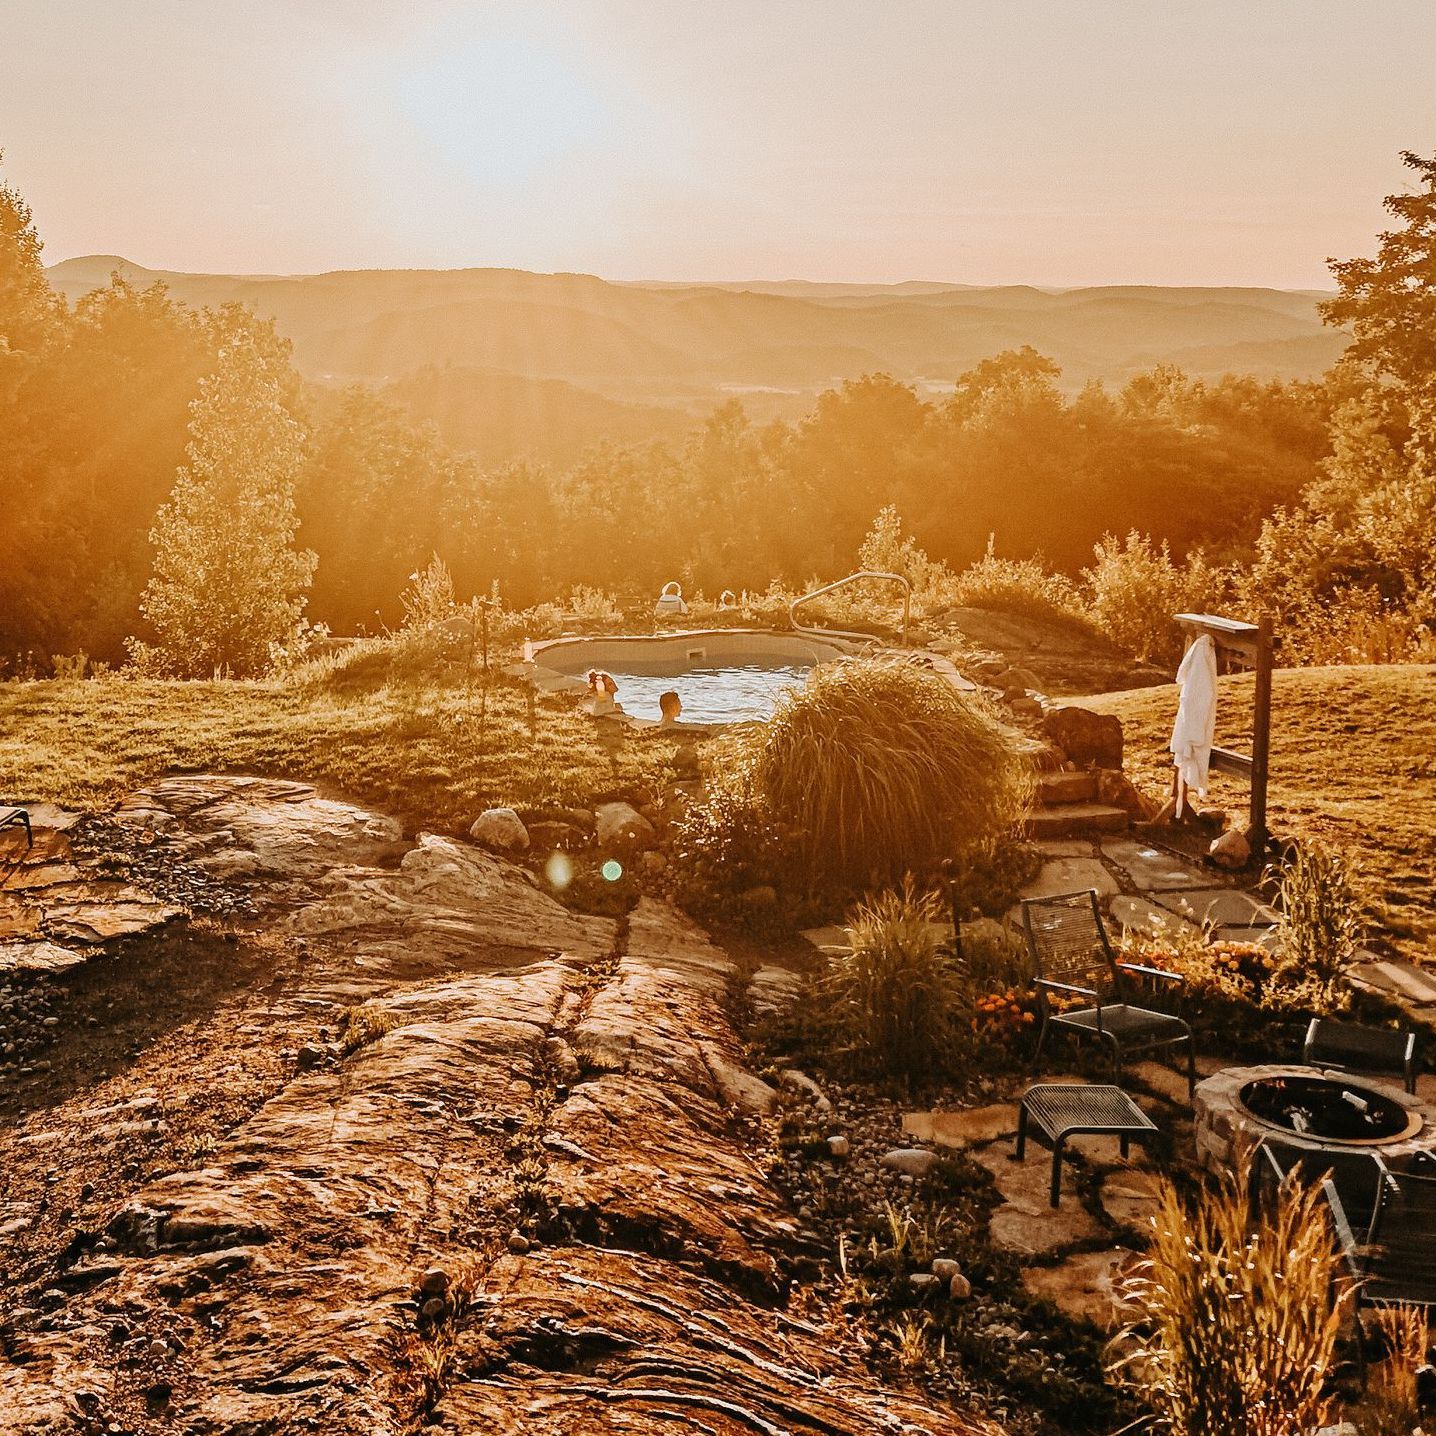 Bathers in a hilltop hot tub at sunset